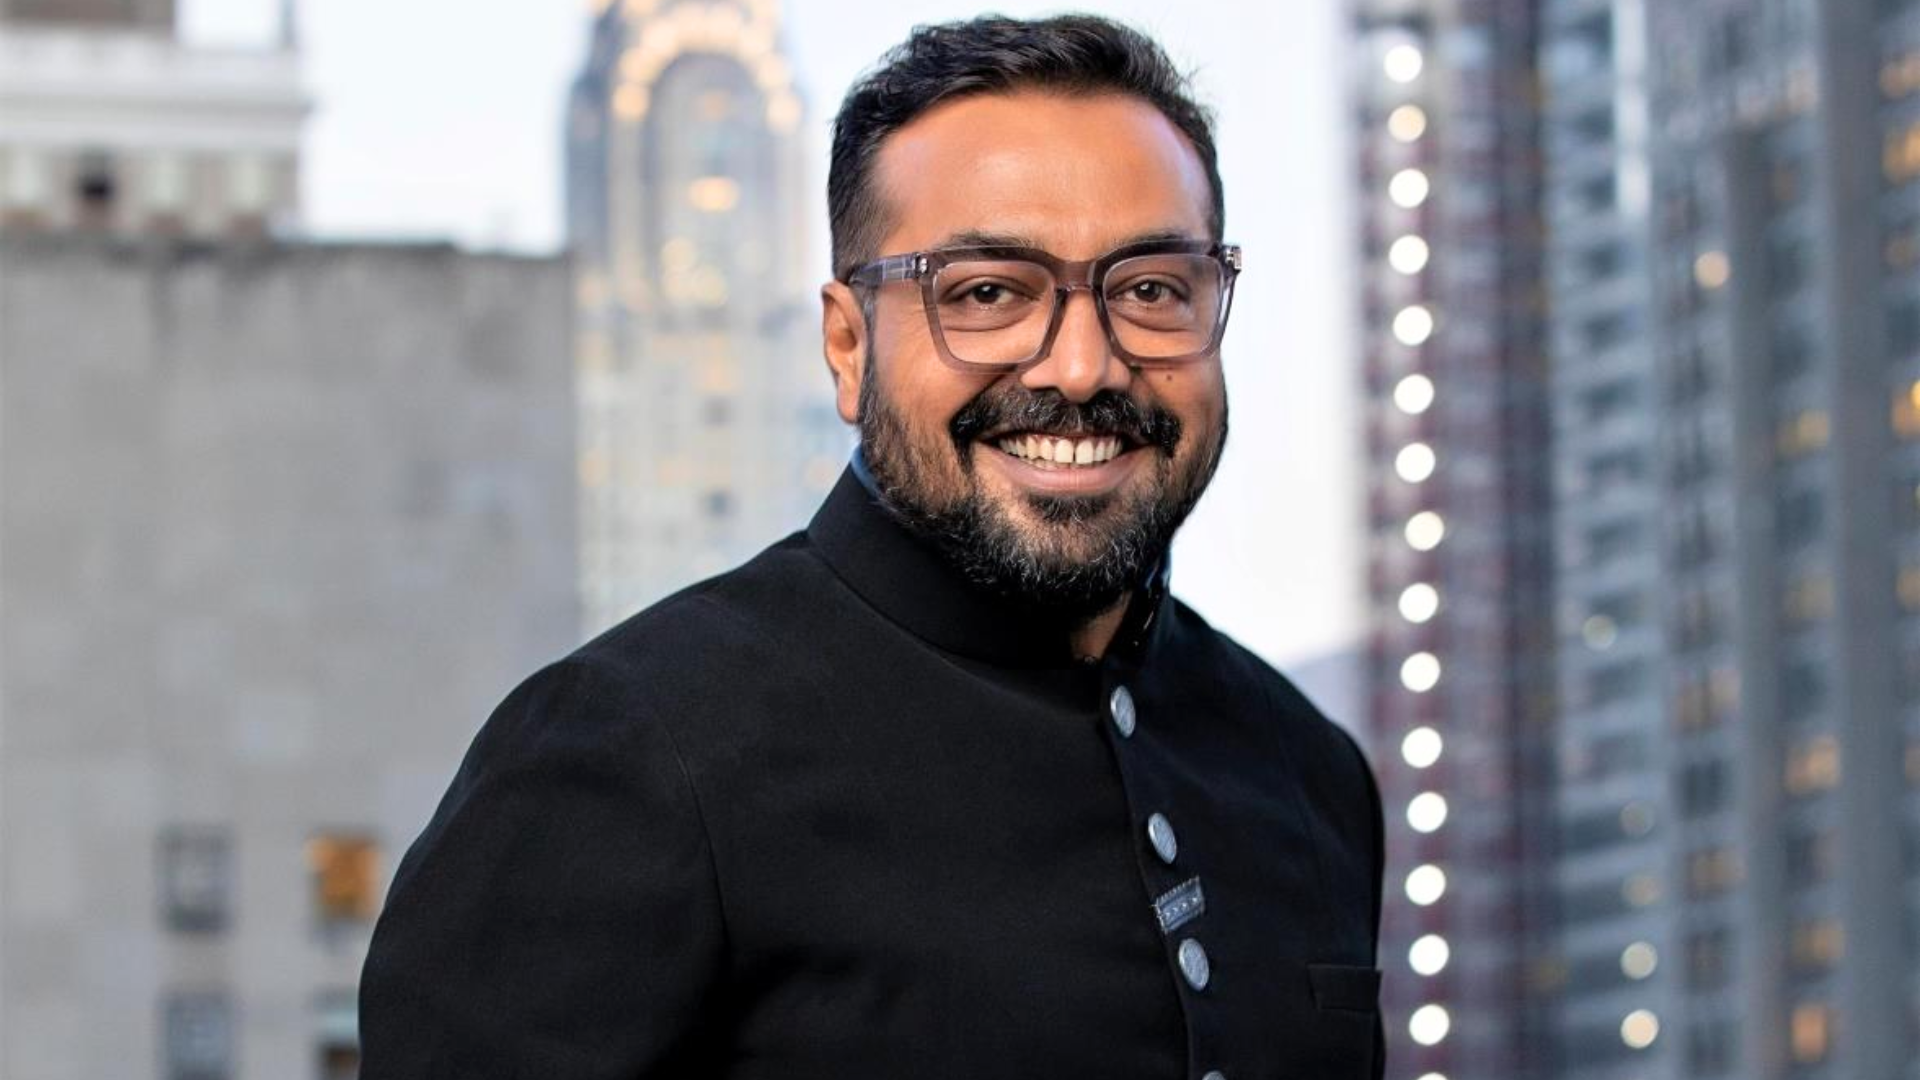 Anurag Kashyap Expresses Frustration Over Newcomers Wasting His Time, Plans To Charge Them Rs. 5 Lacs For An Hour: “Call Me Or Stay The F*** Away”